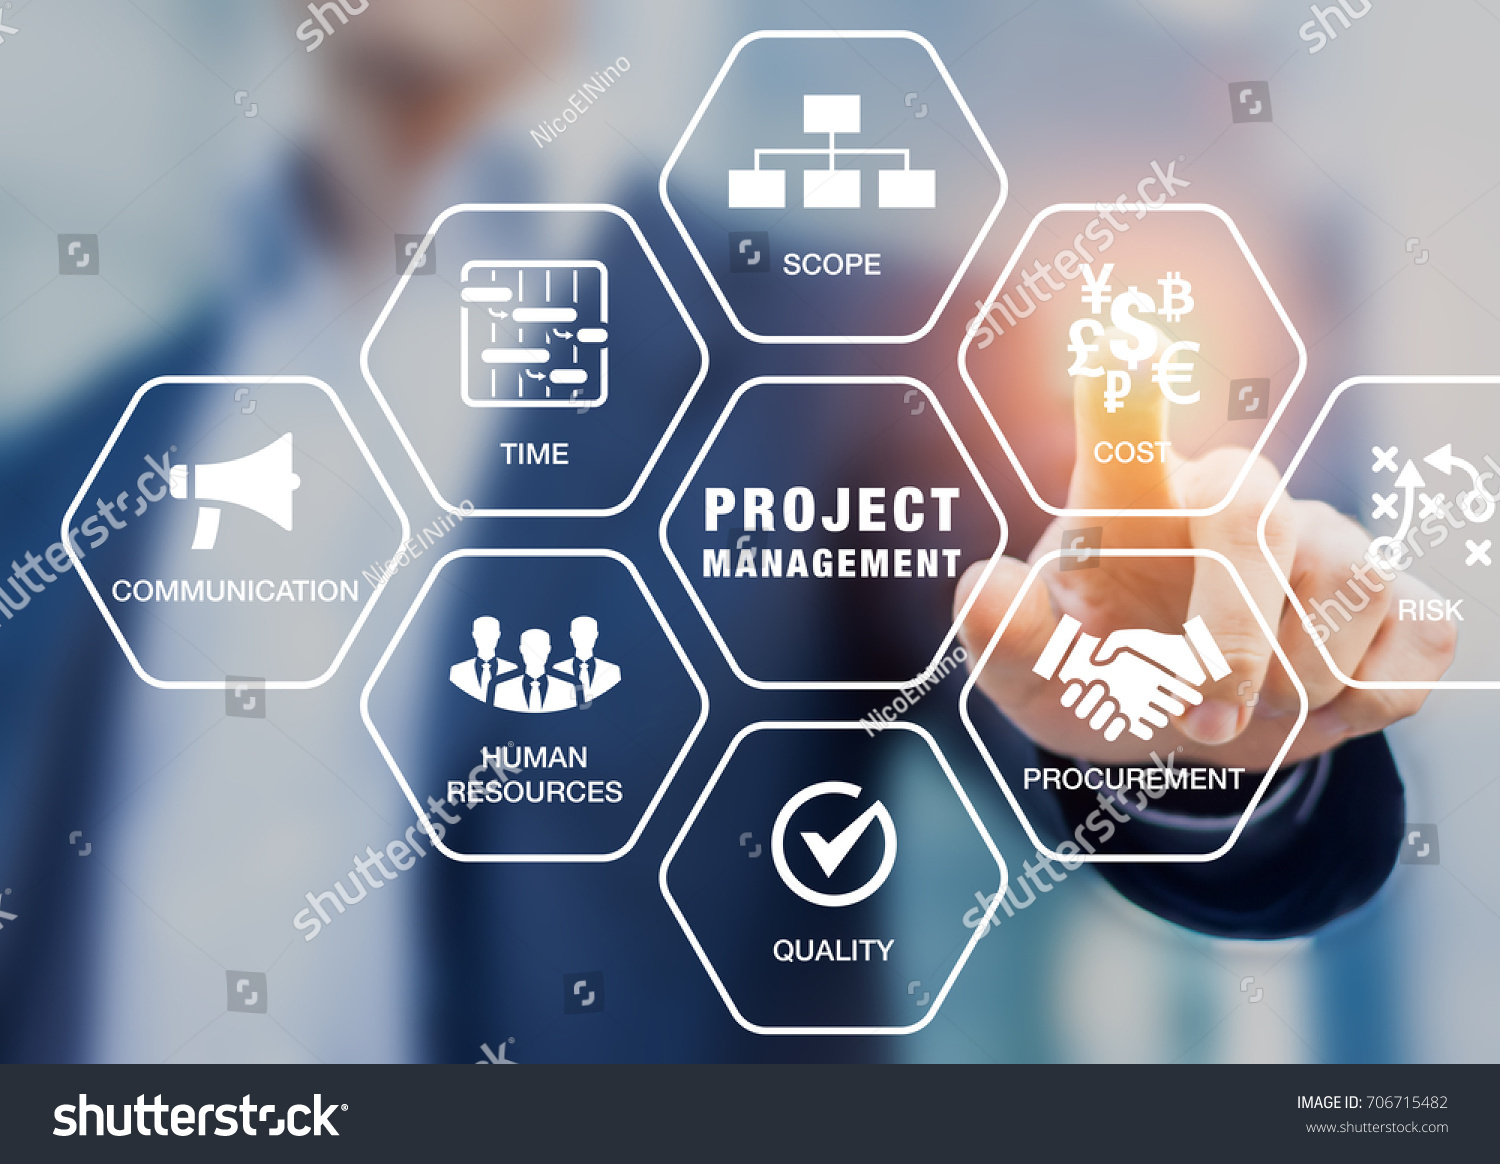 Presentation of project management areas of knowledge such as cost, time, scope, human resources, risks, quality and communication with icons and a manager touching virtual screen #706715482